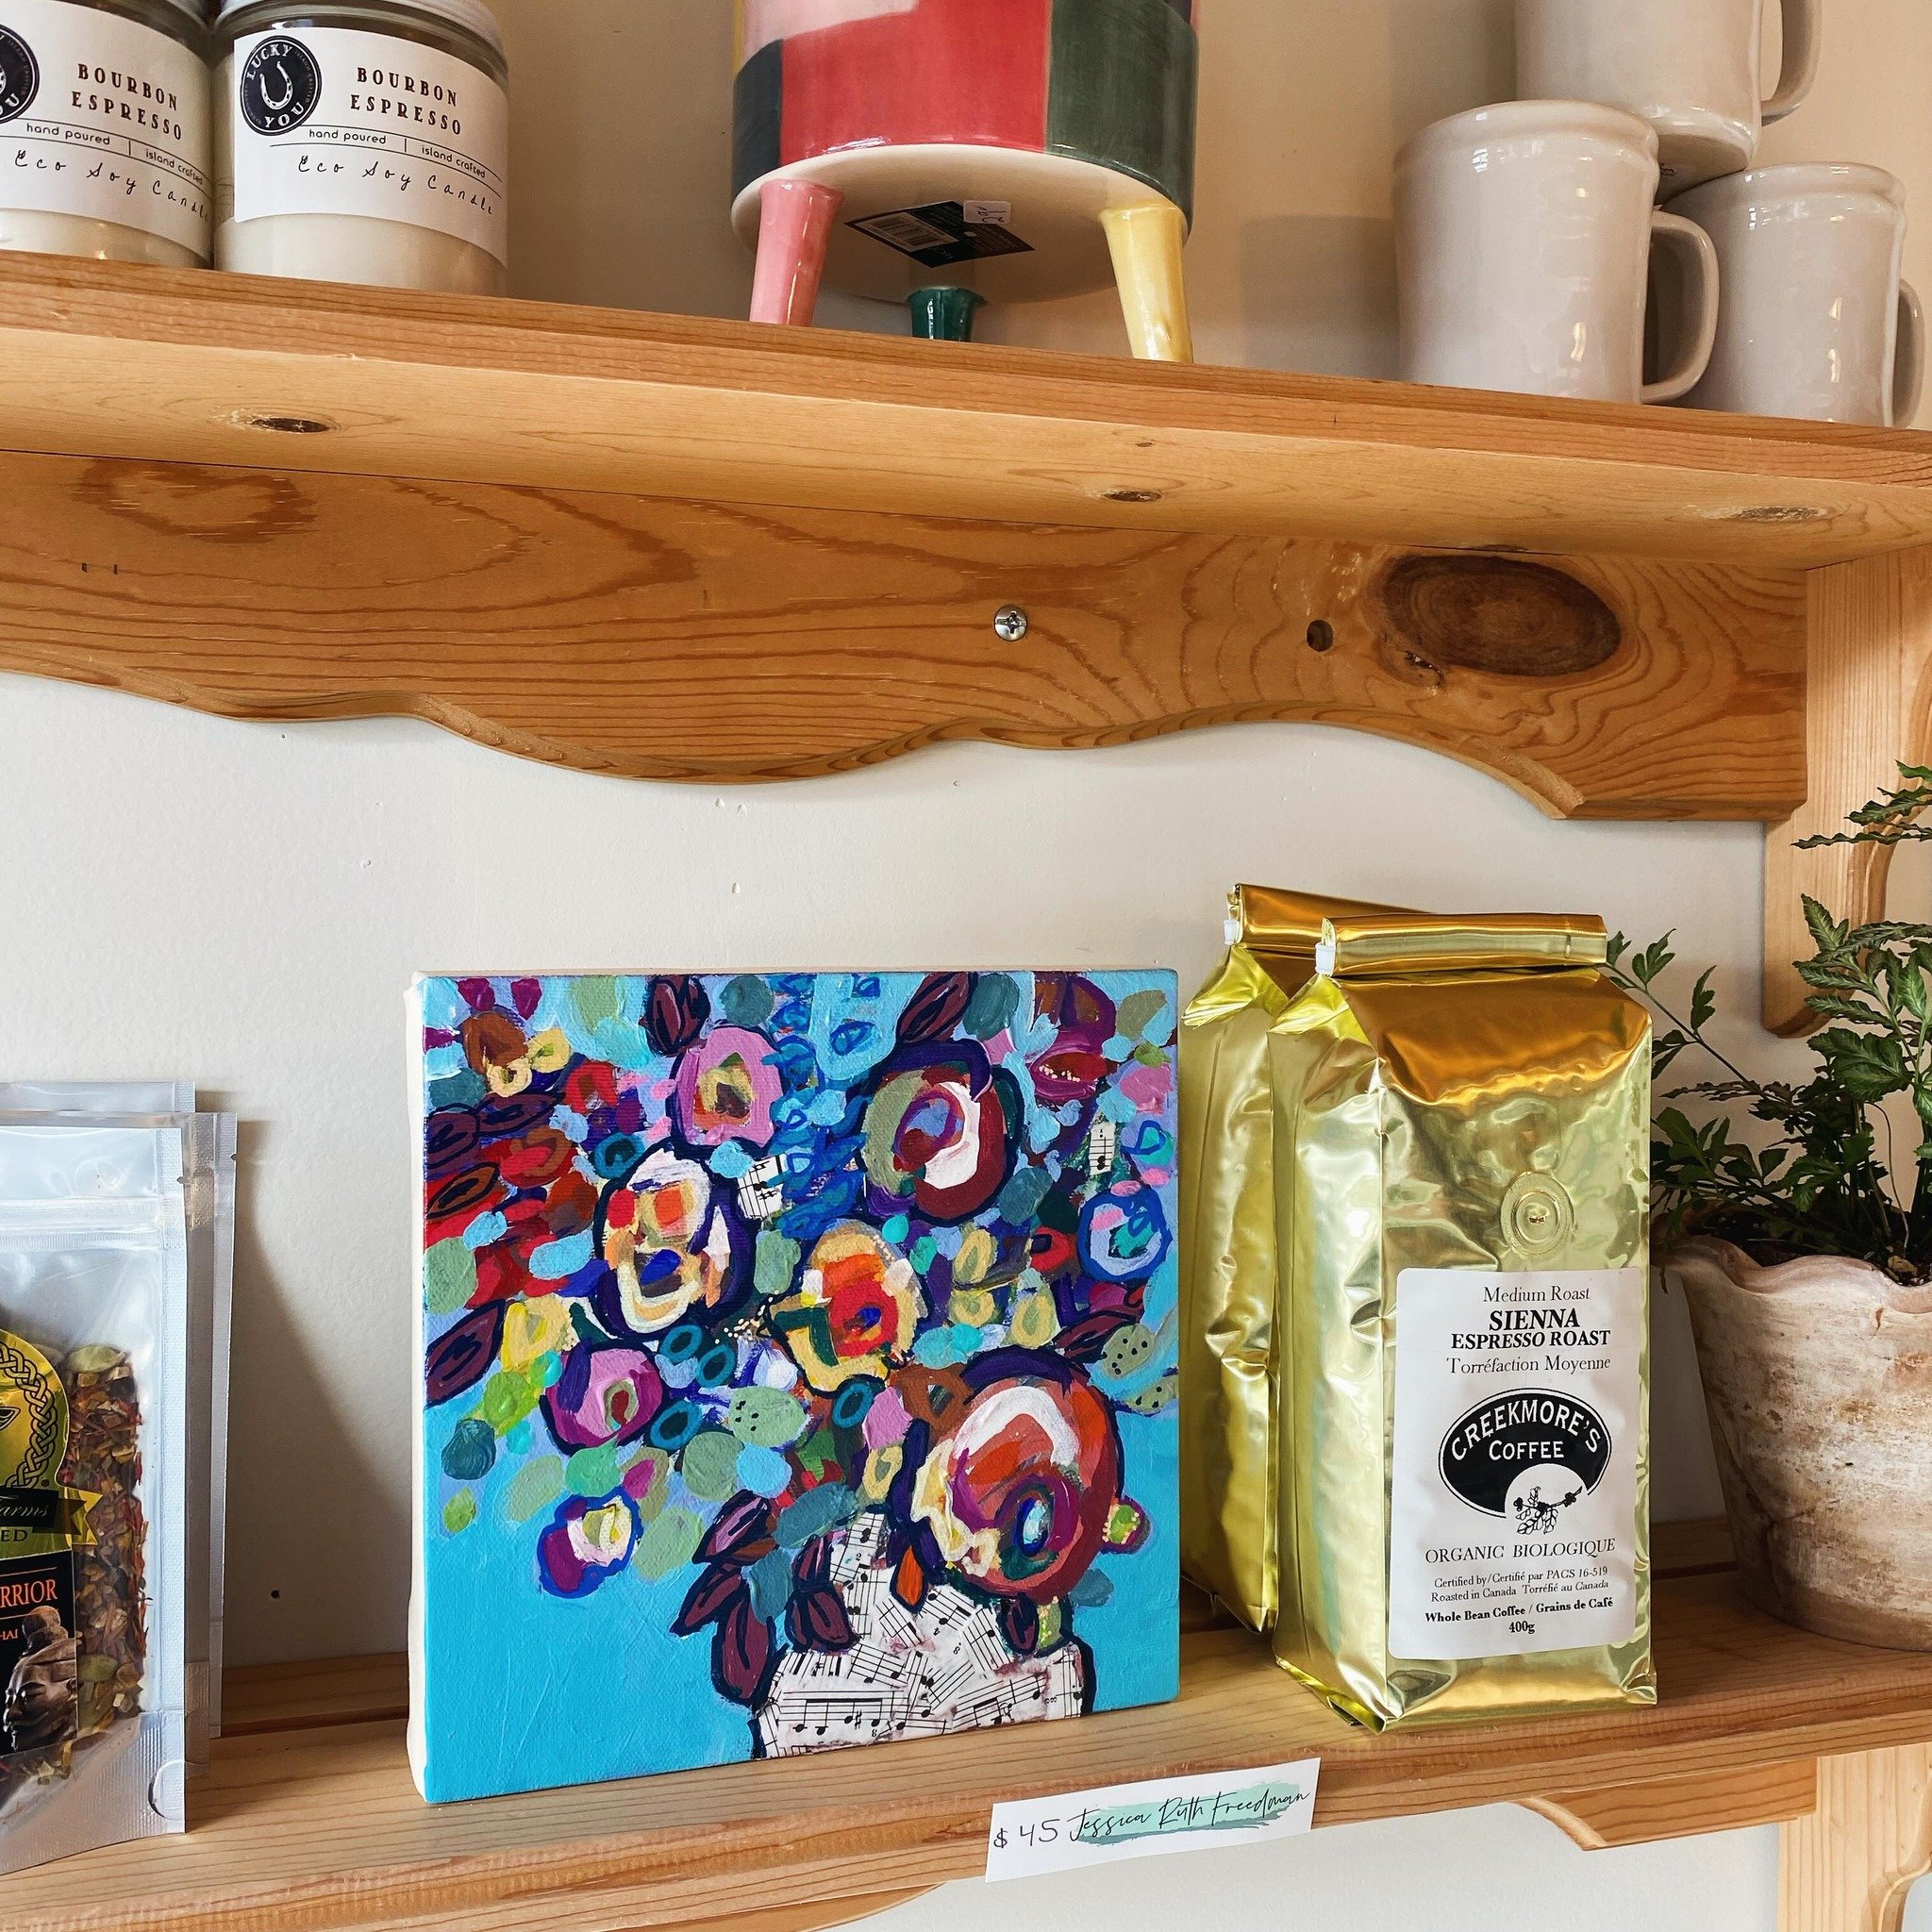 Art, candles, coffee and plants. All your bases covered at my favorite place in the world @artisansgarden in Sooke BC.